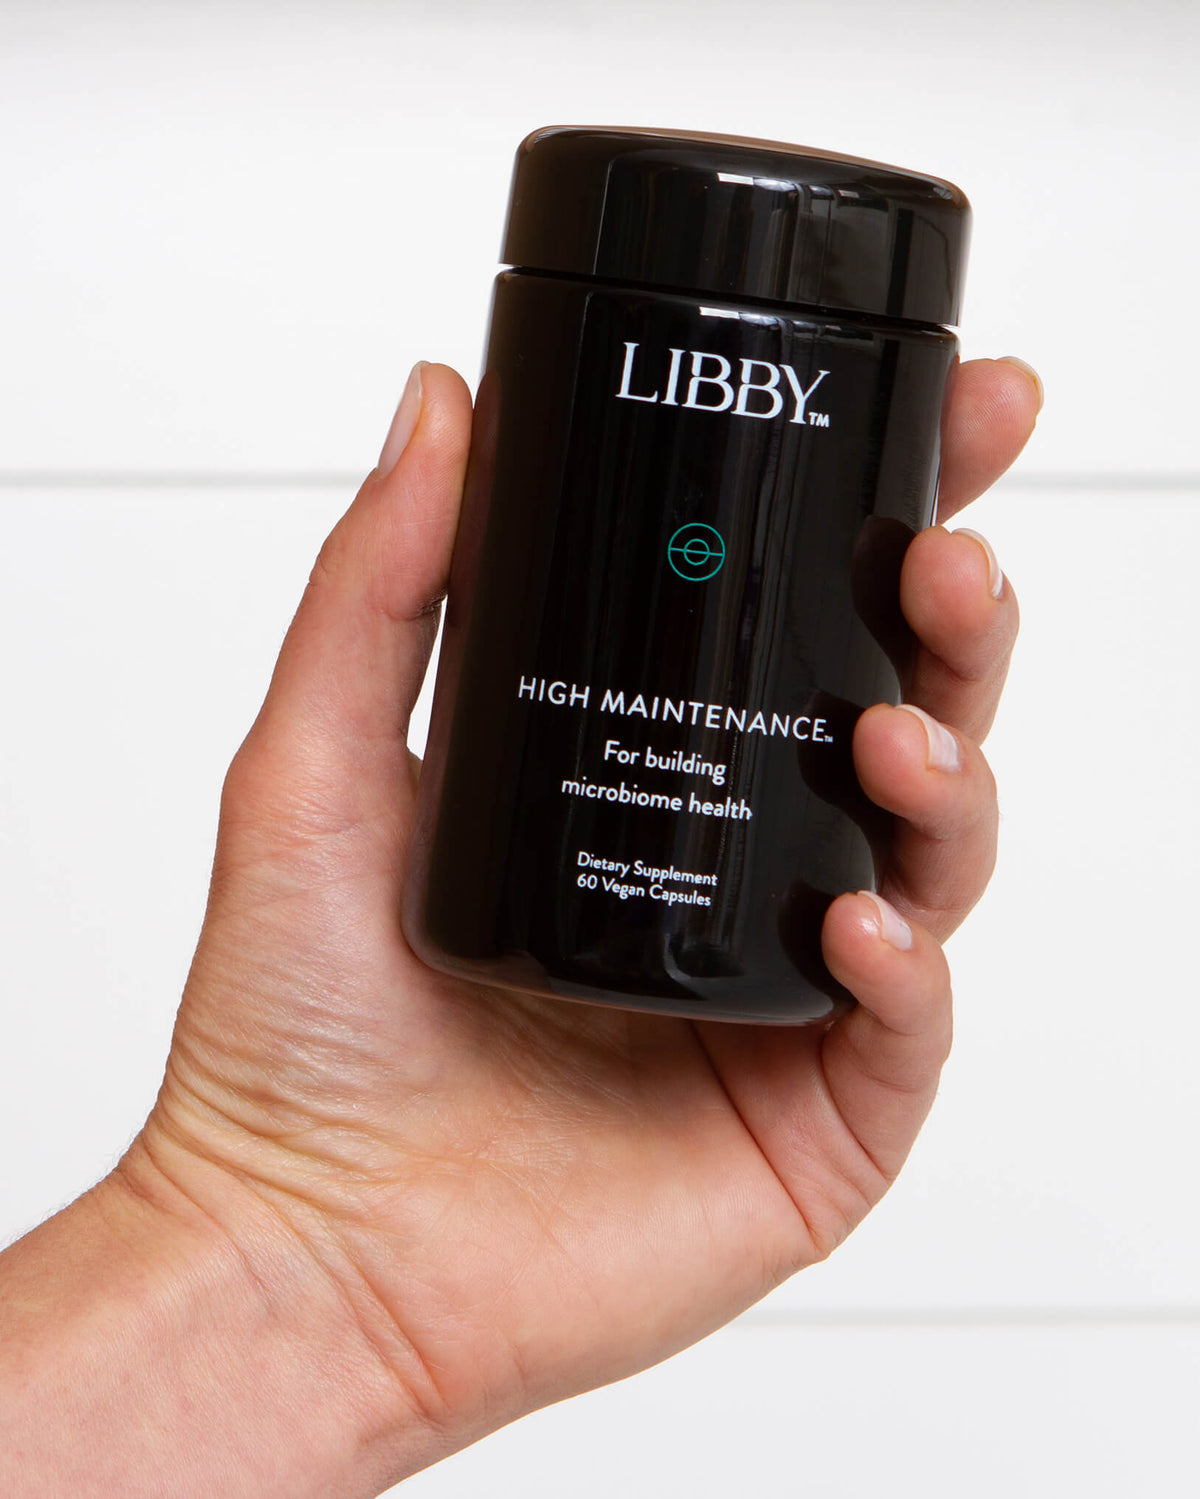 High Maintenance supplement bottle from Libby being held in hand.